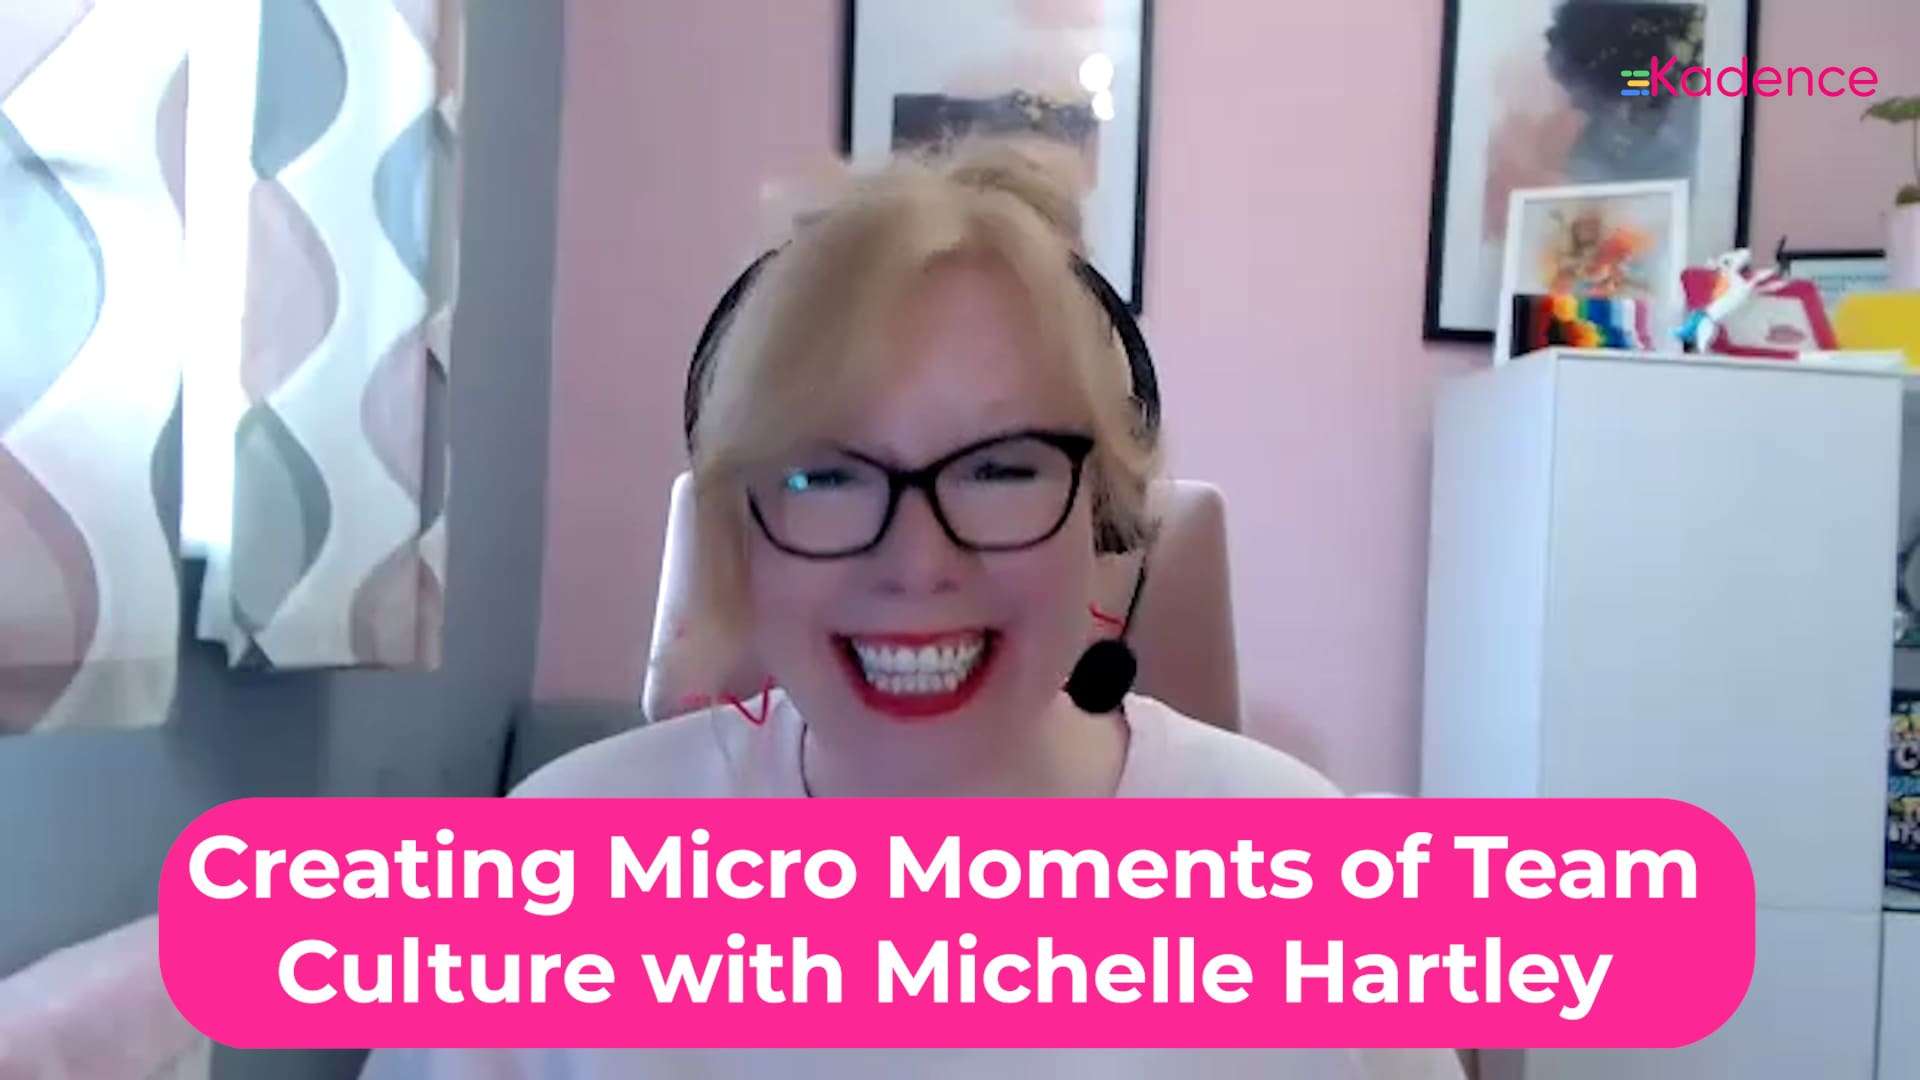 Nine Micro Moments to Build Team Culture with Michelle Hartley